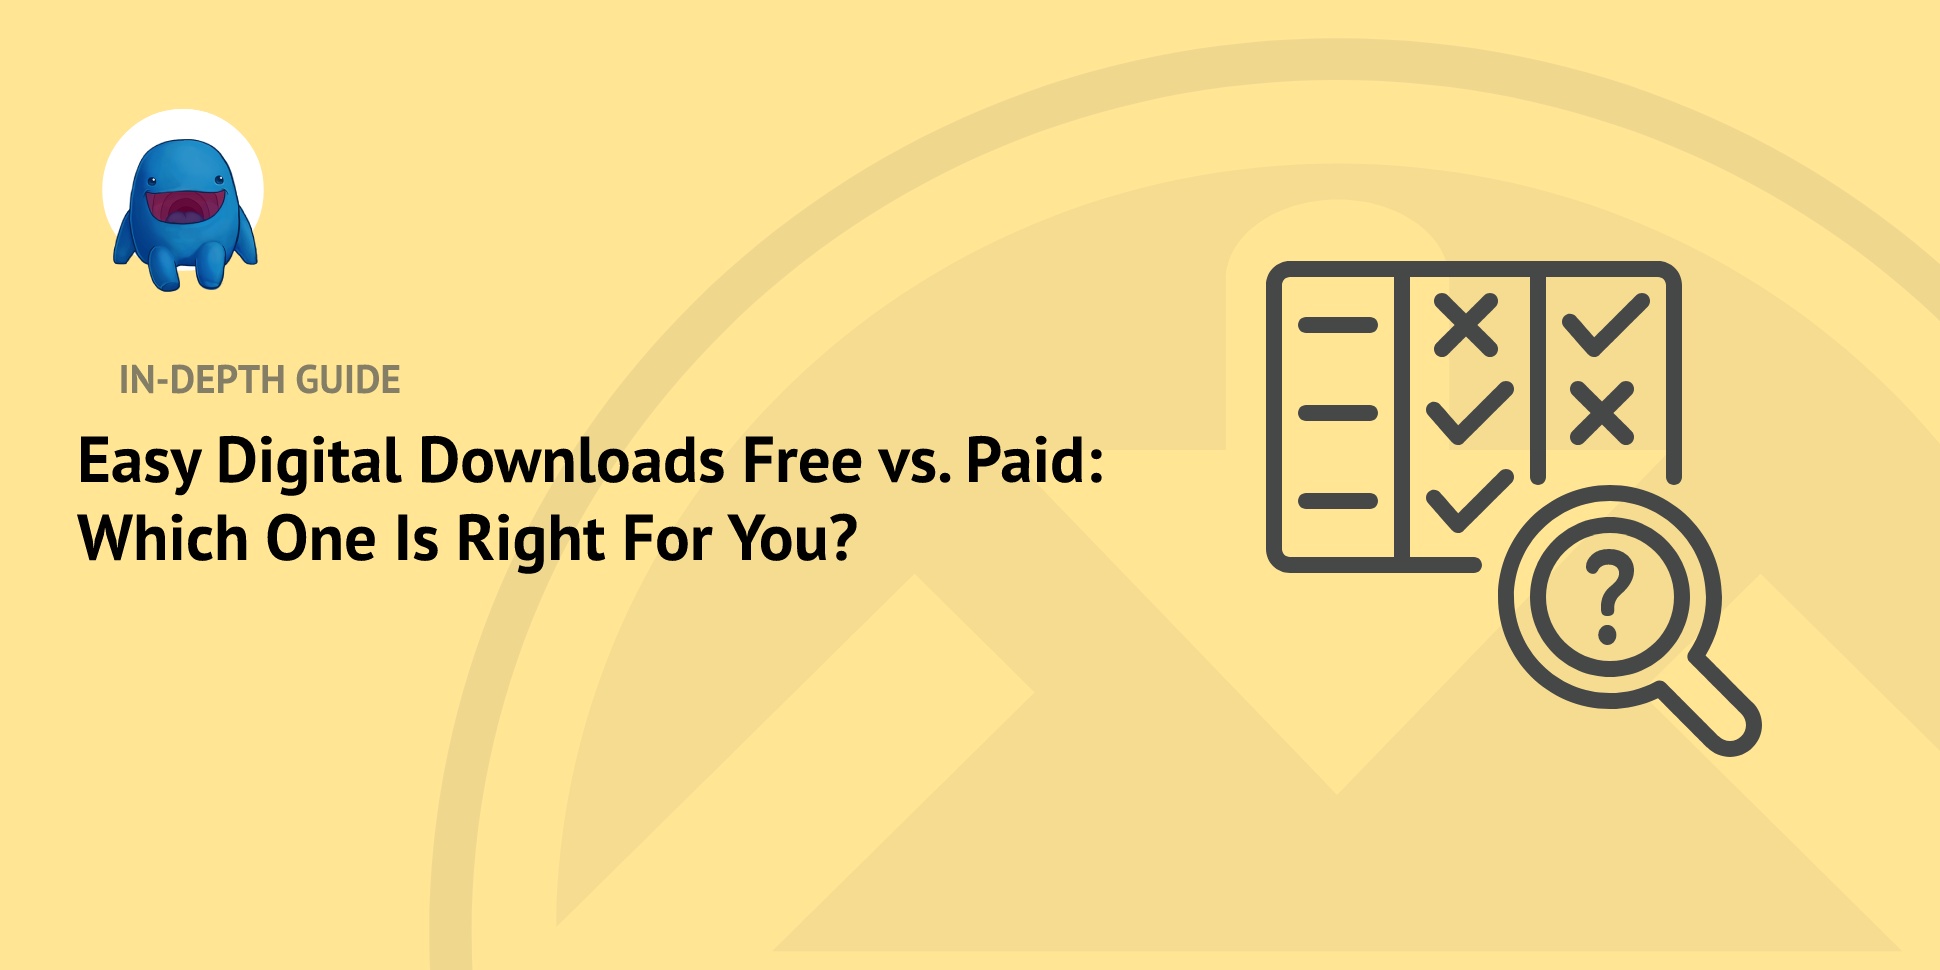 EDD Free vs Paid: Which One Is Right For You?